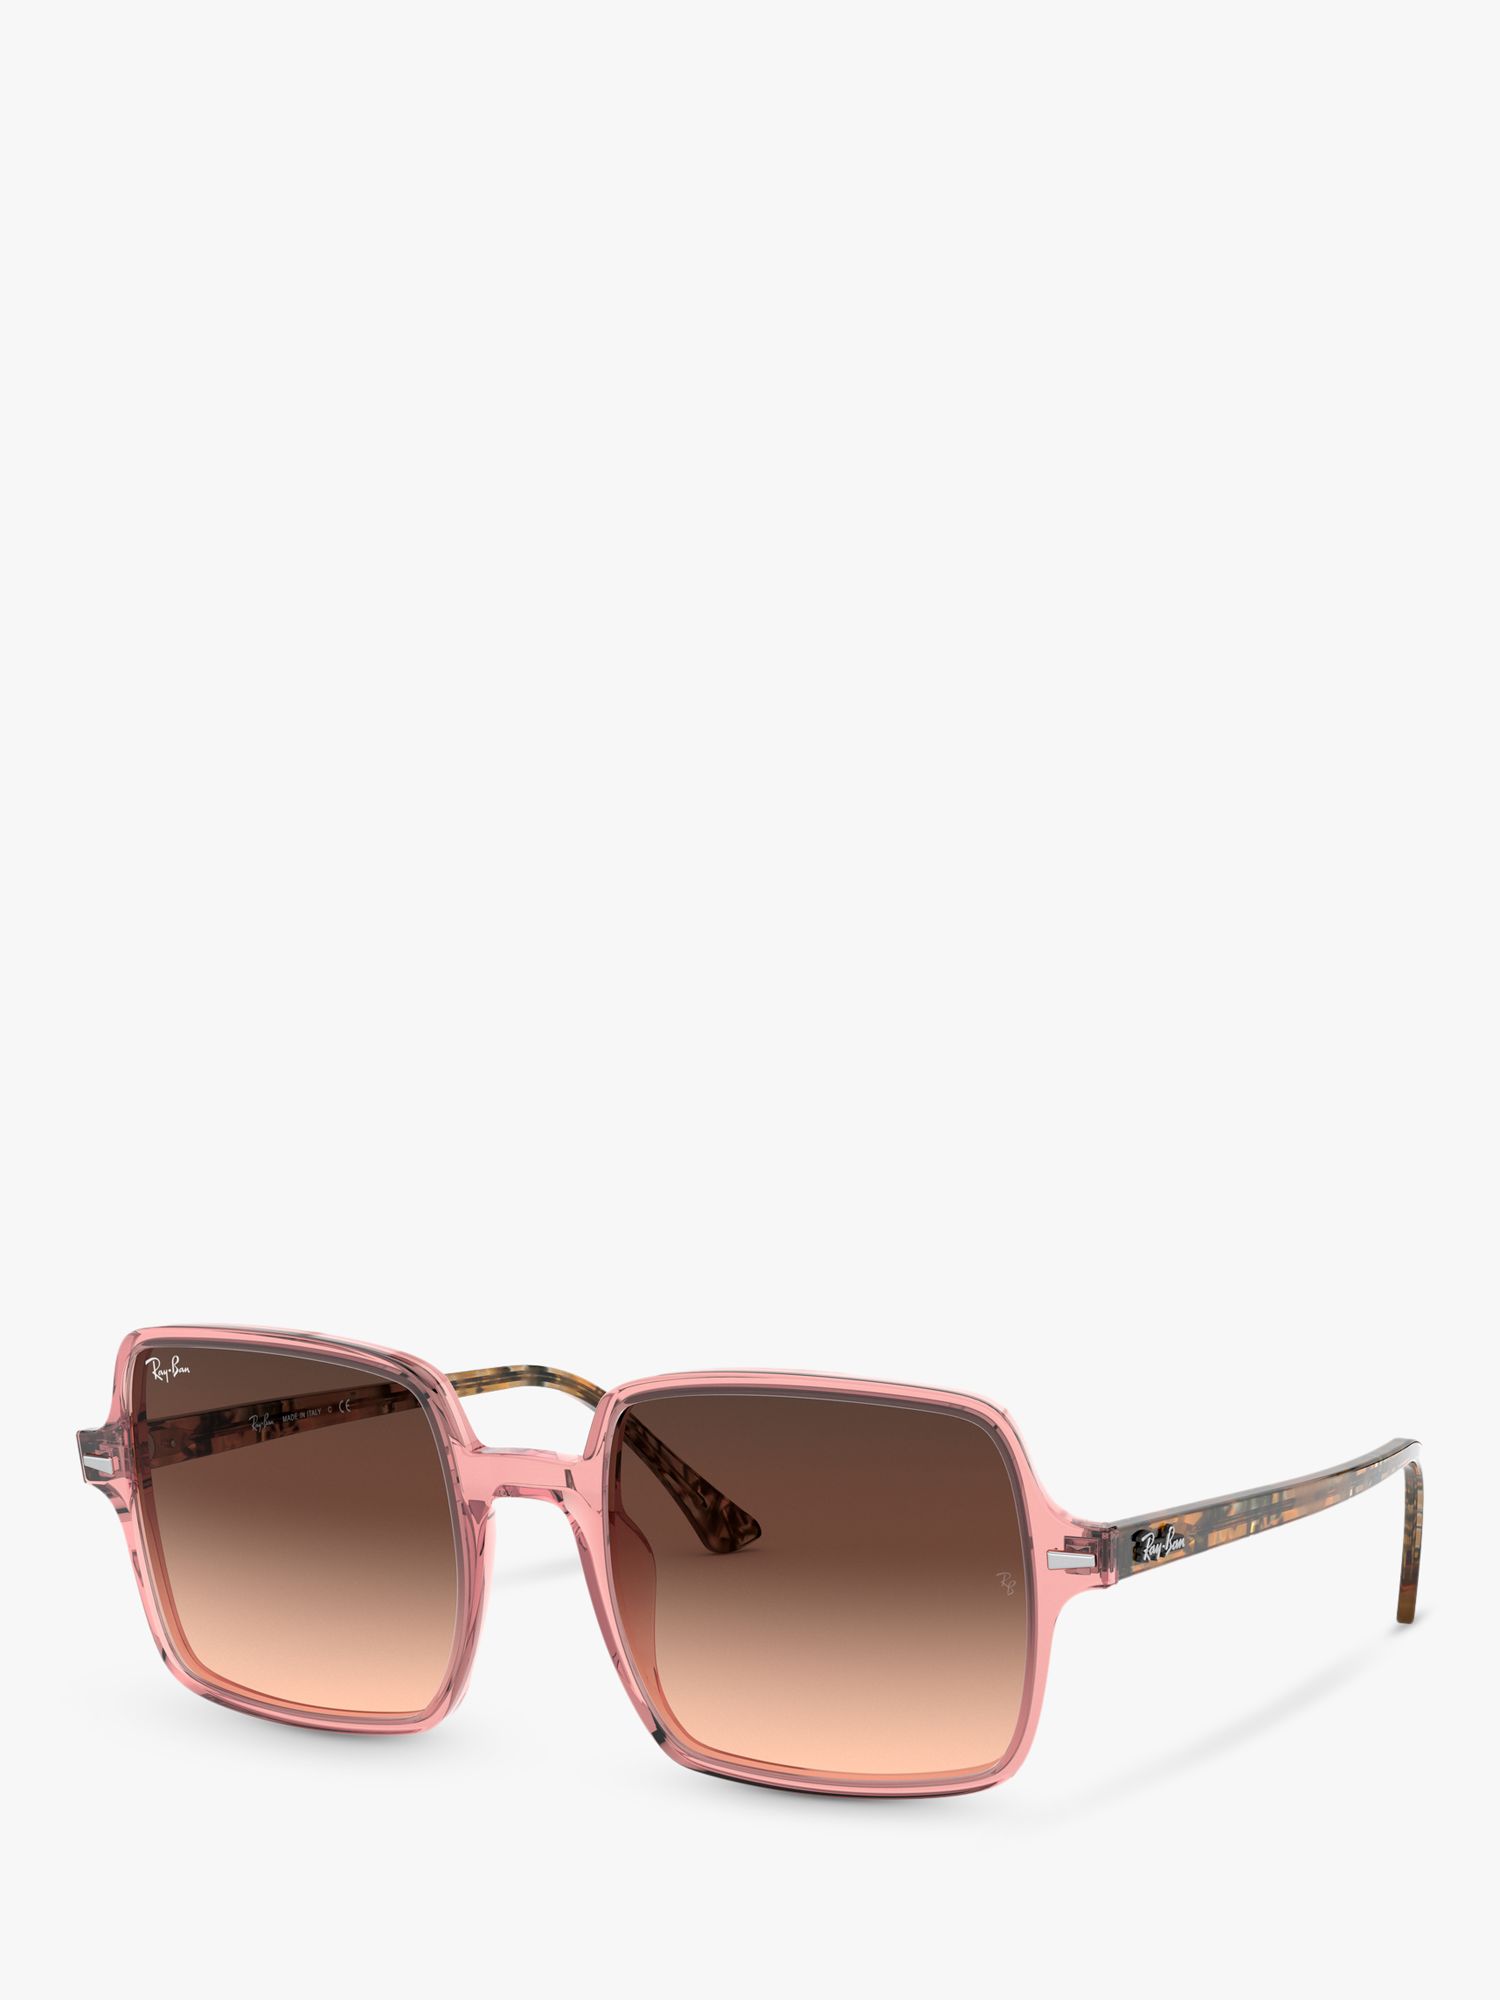 Ray-Ban RB1973 Women's Square Sunglasses, Transparent Pink/Brown Gradient  at John Lewis & Partners